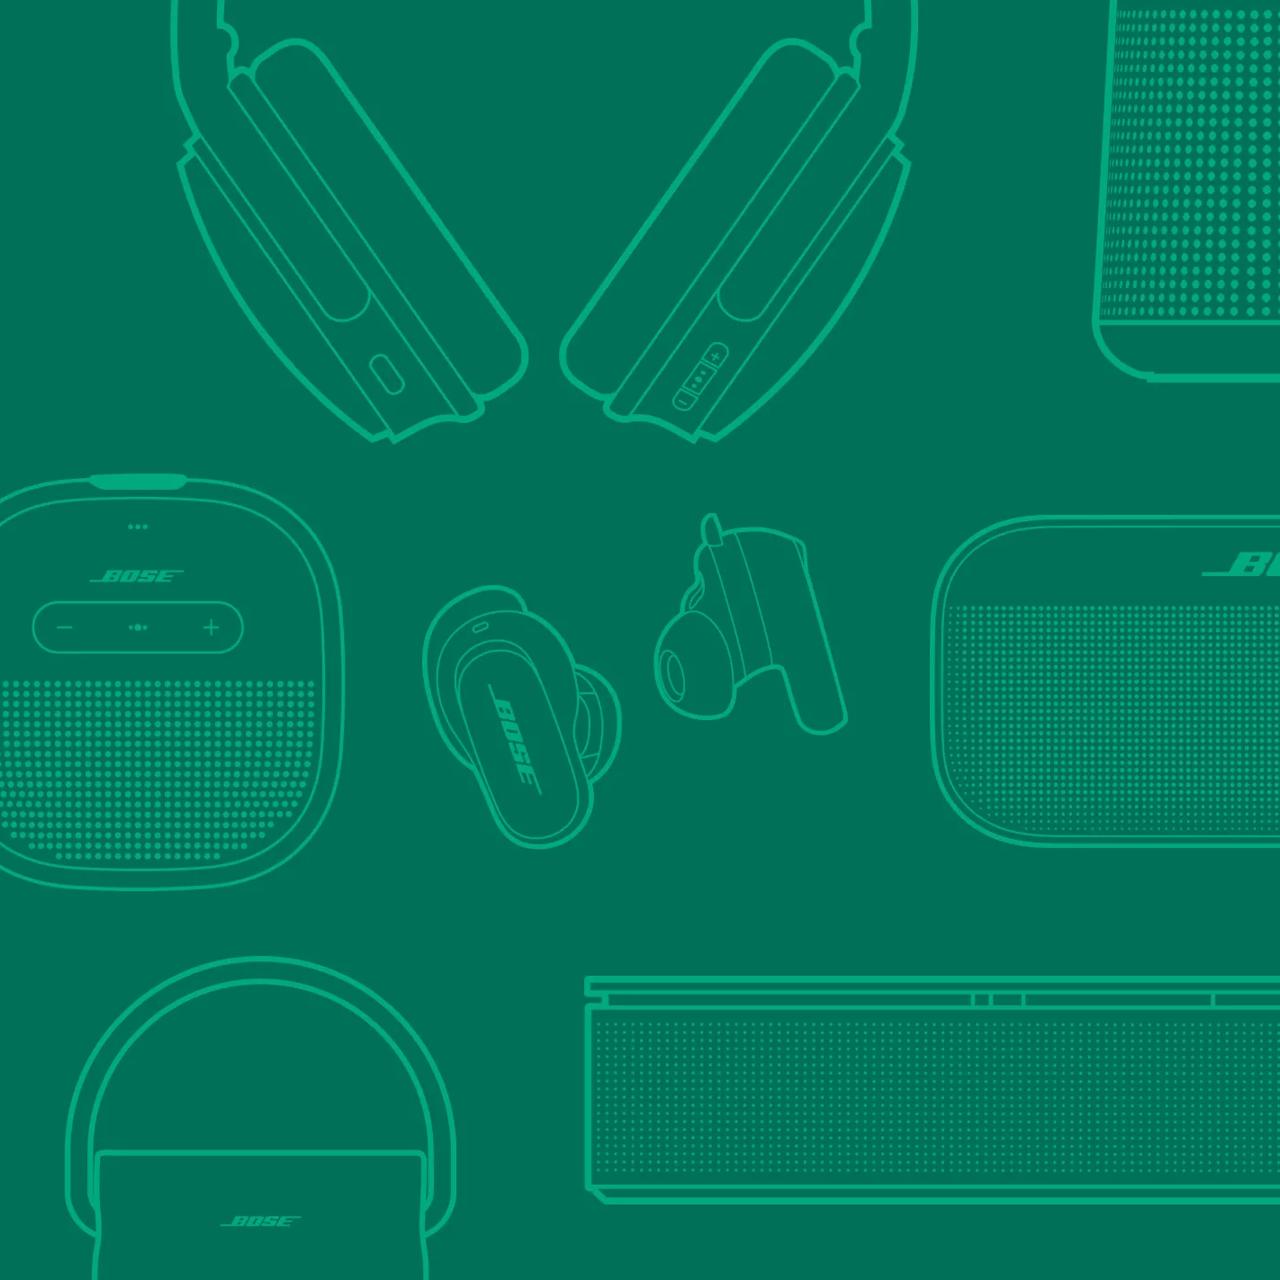 Bose Certified Refurbished products